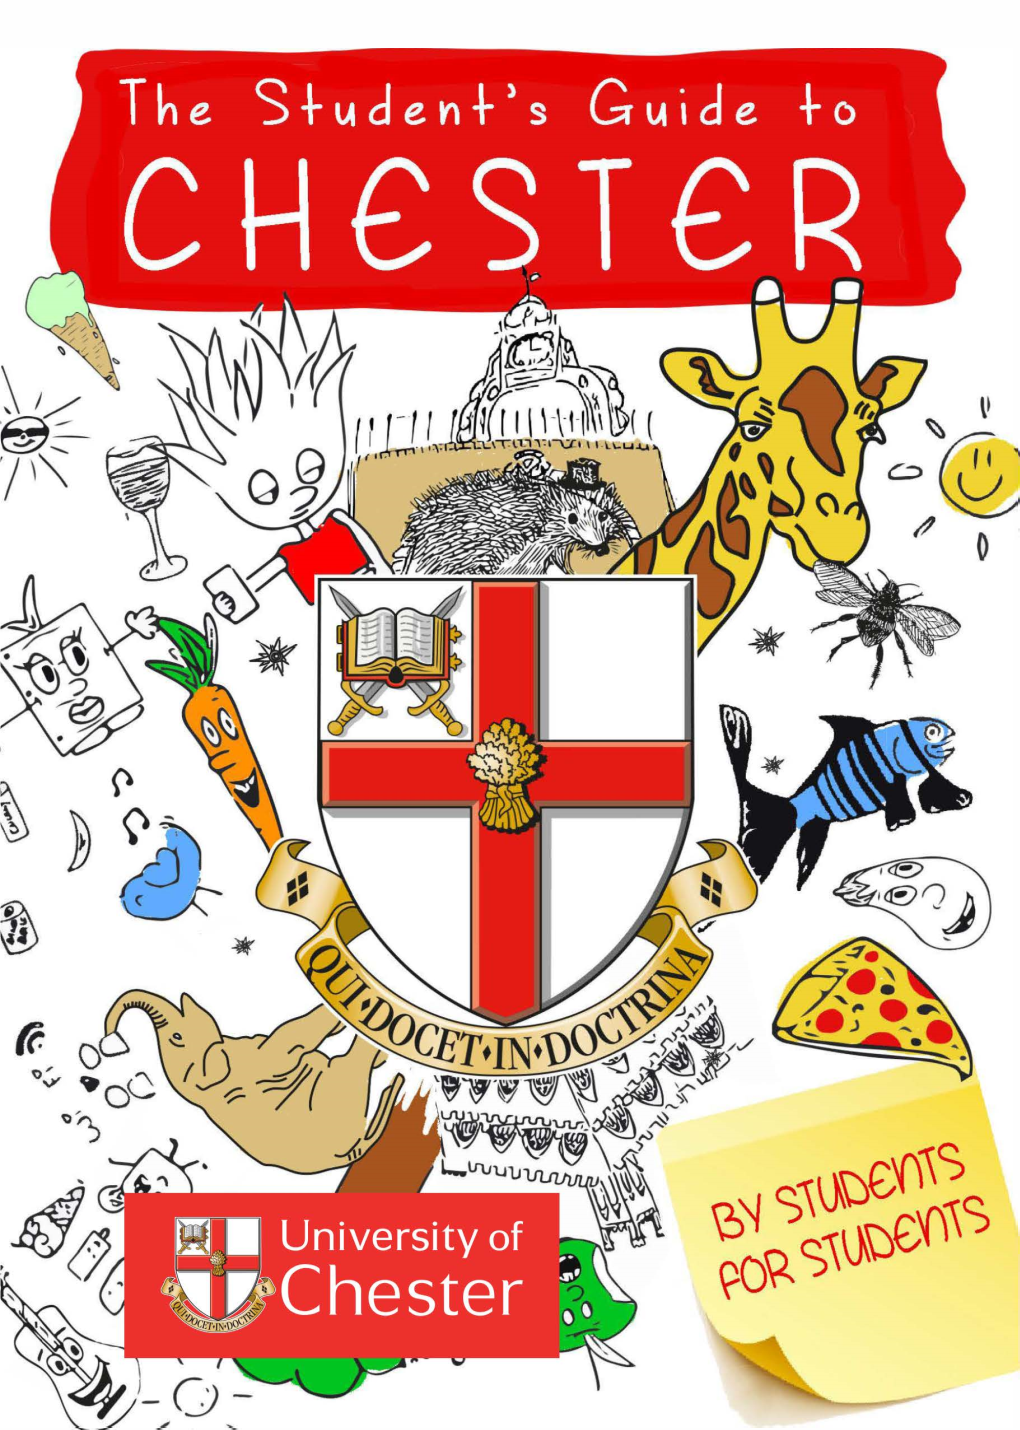 Students' Guide to Chester